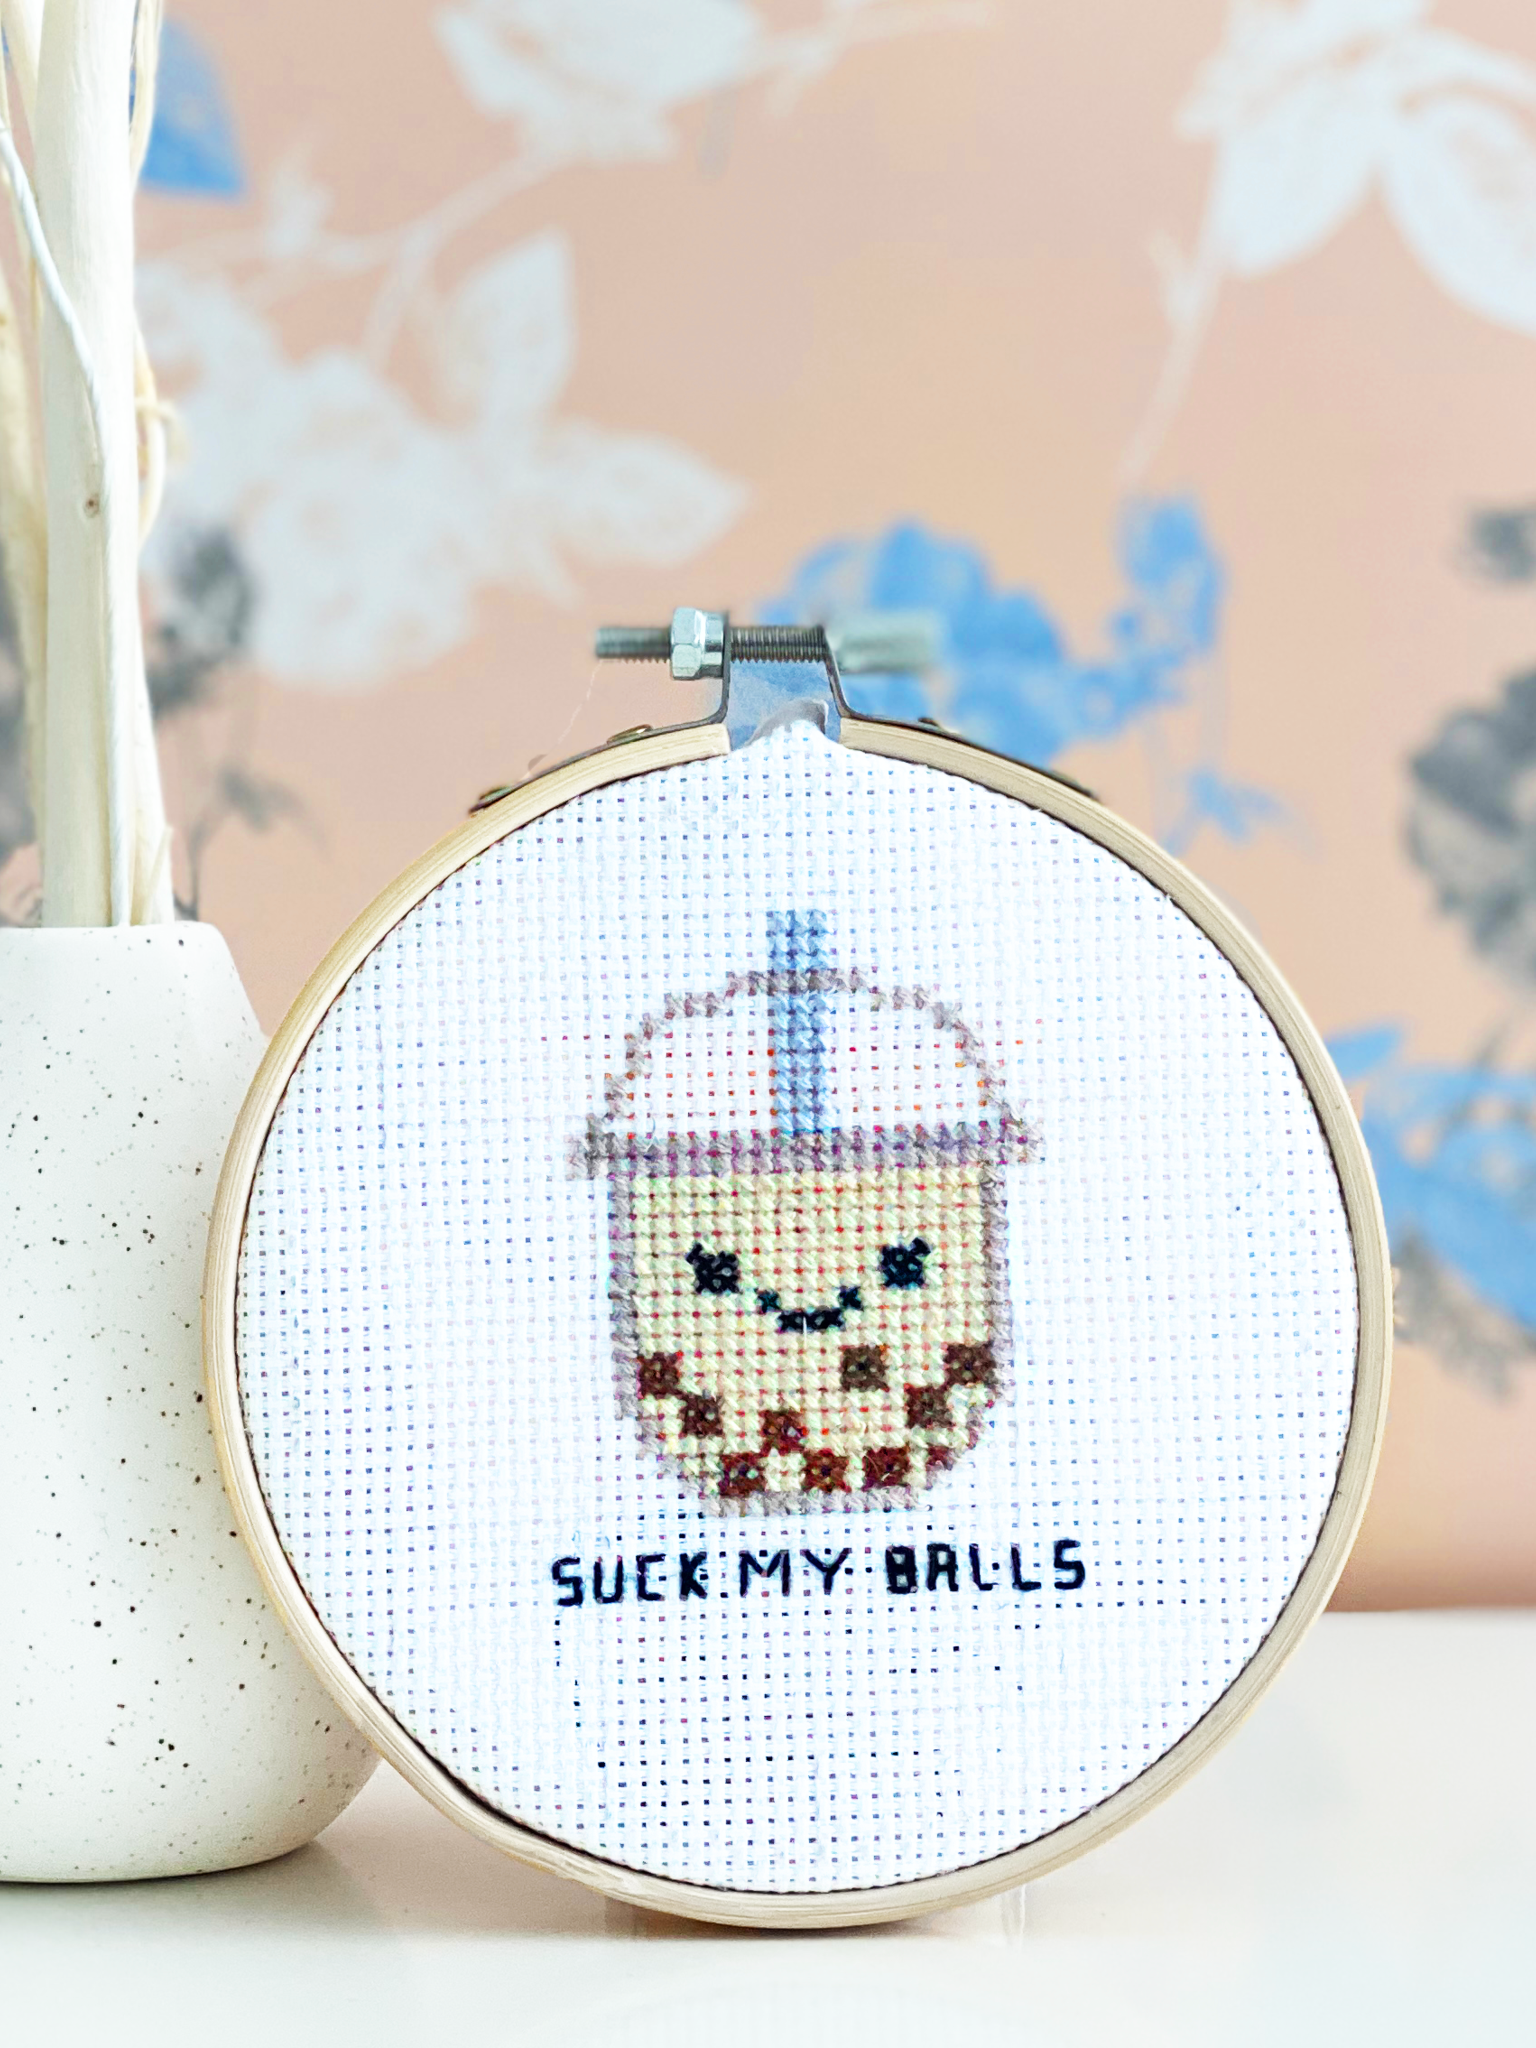 Free download Suck My Tapioca Balls DIY Cross Stitch Kit TheCloudFactory [2046x2048] for your Desktop, Mobile & Tablet. Explore Stitch Drinking Boba Wallpaper. Boba Fett Wallpaper, Stitch iPhone Wallpaper